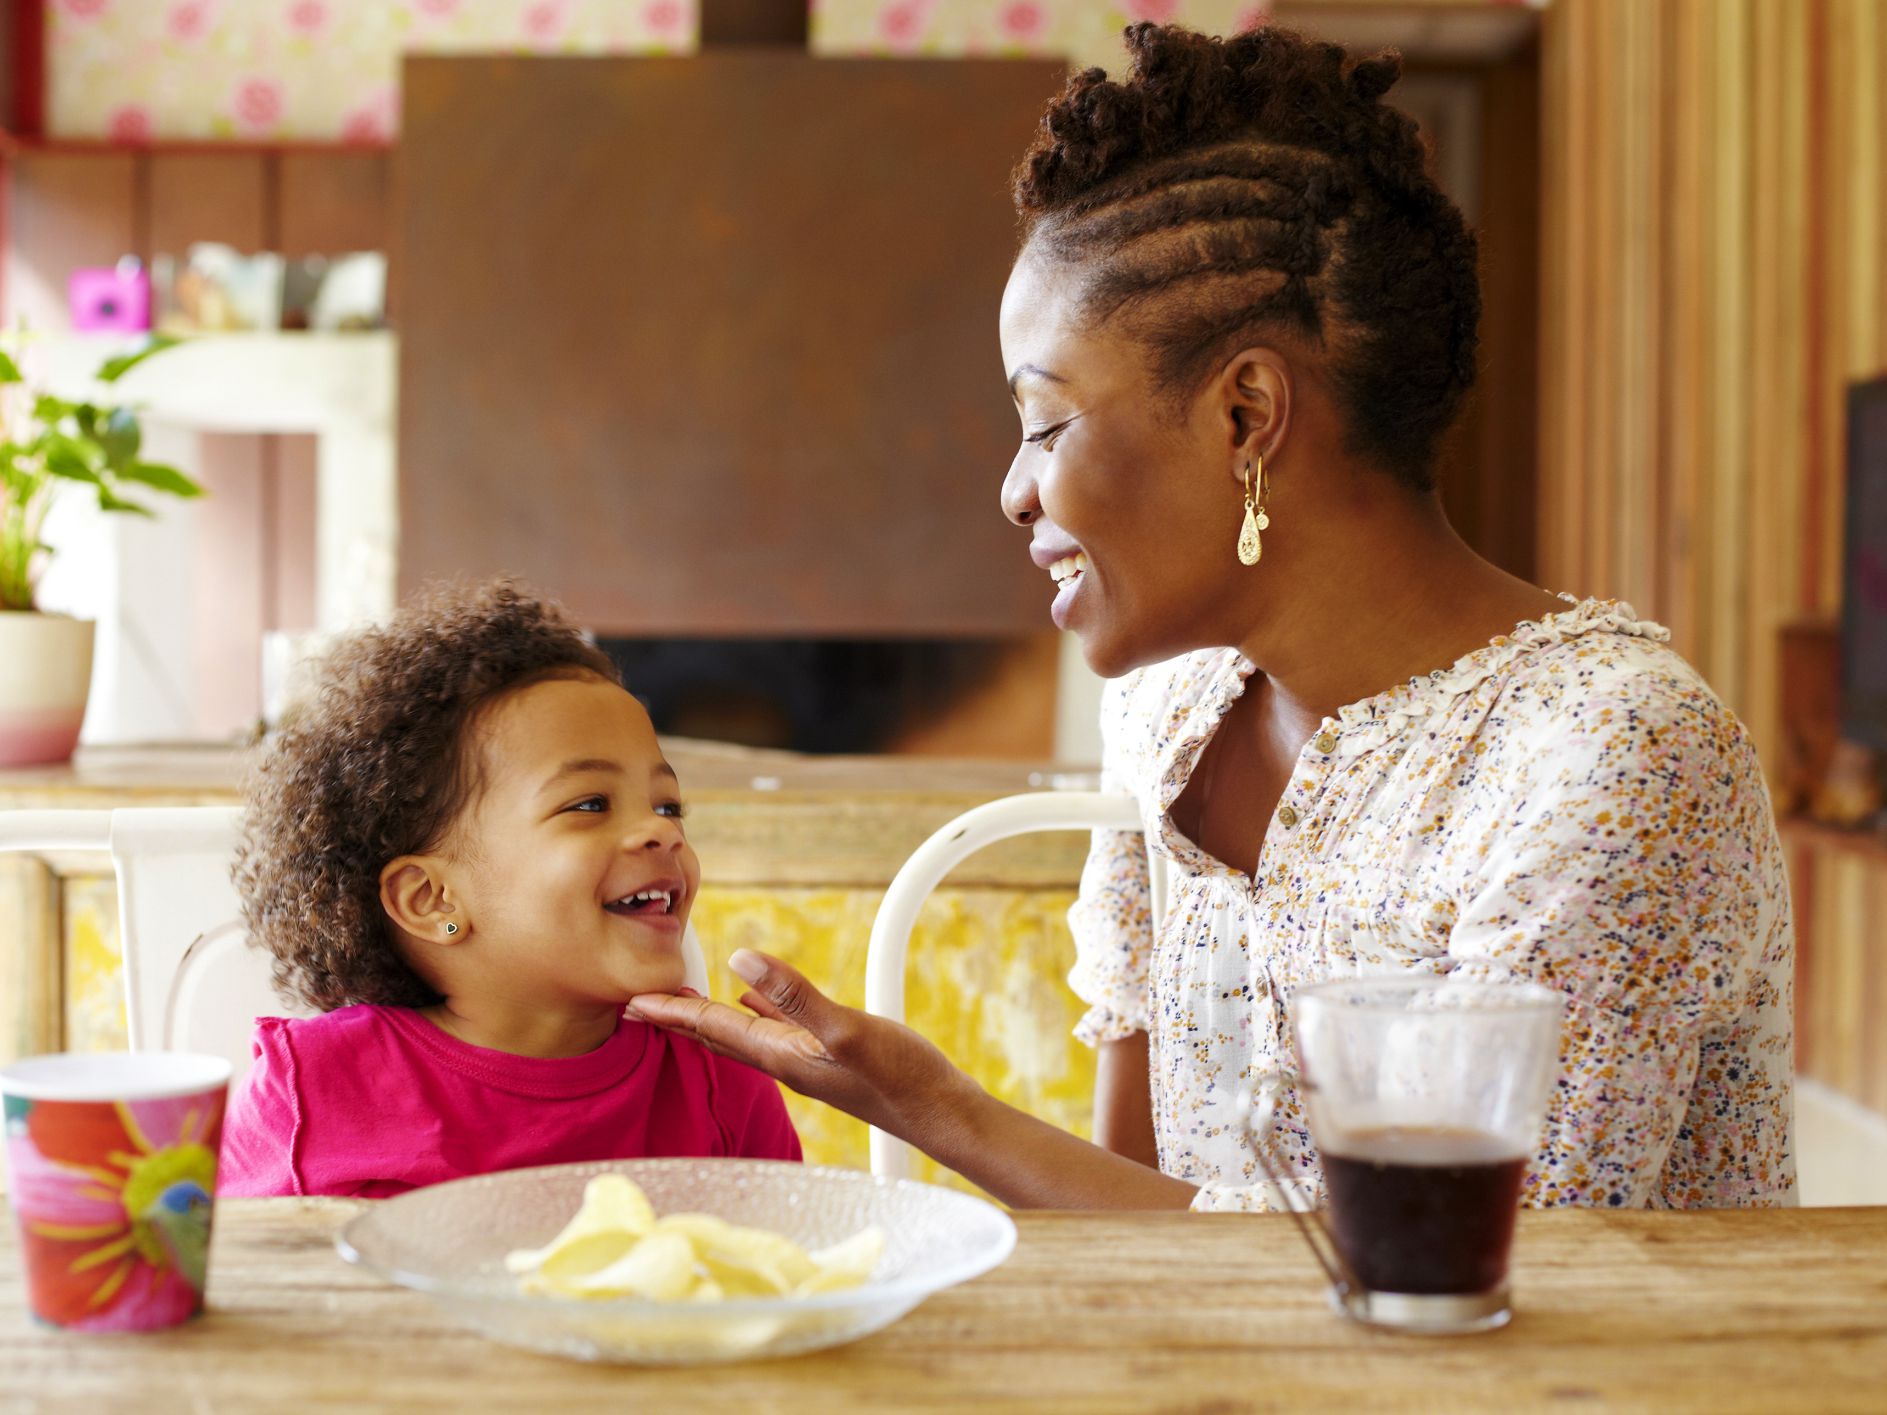 7 Pieces of Parenting Advice Everyone Could Use Right Now